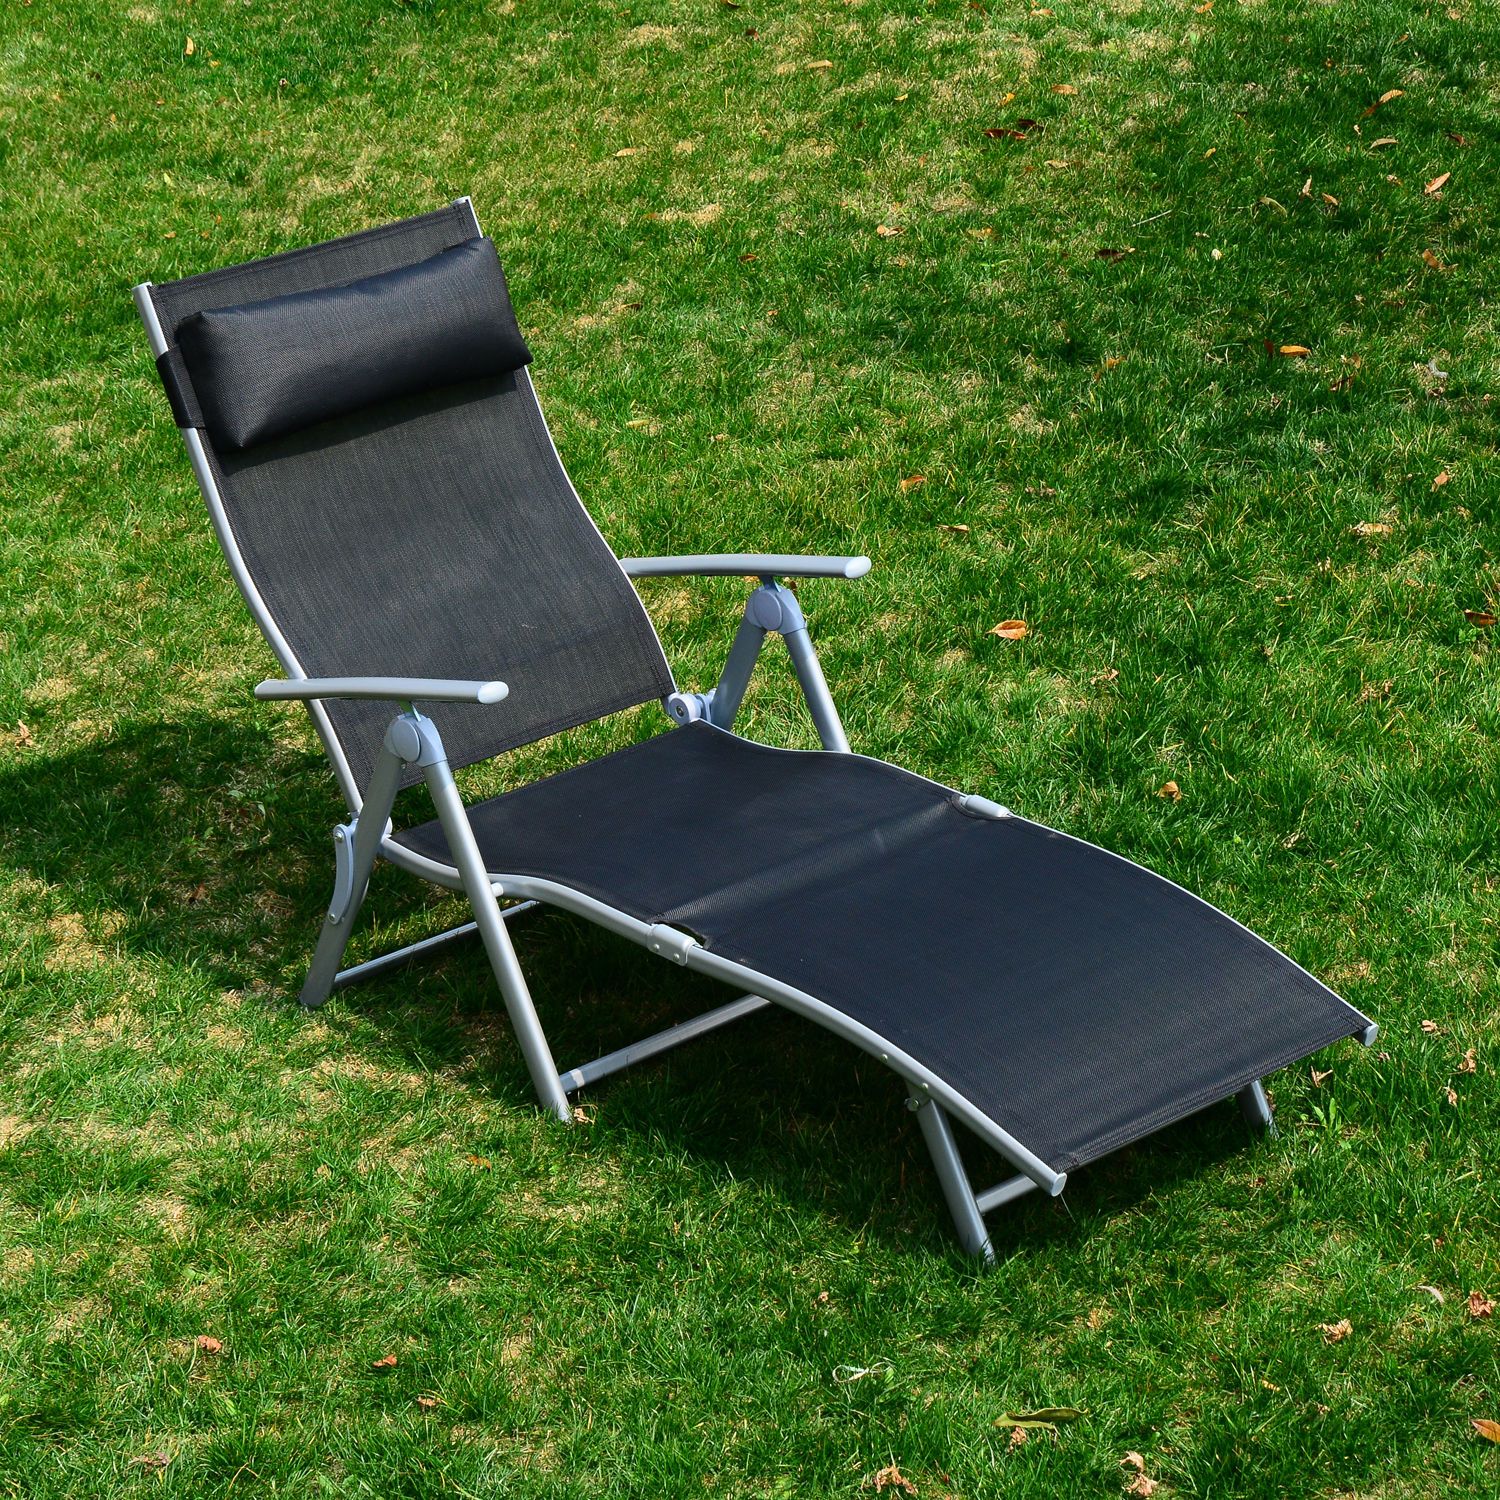 Chaise Lounge Chair Folding Pool Beach Yard Adjustable Patio Furniture Within Adjustable Outdoor Lounger Chairs (View 12 of 15)